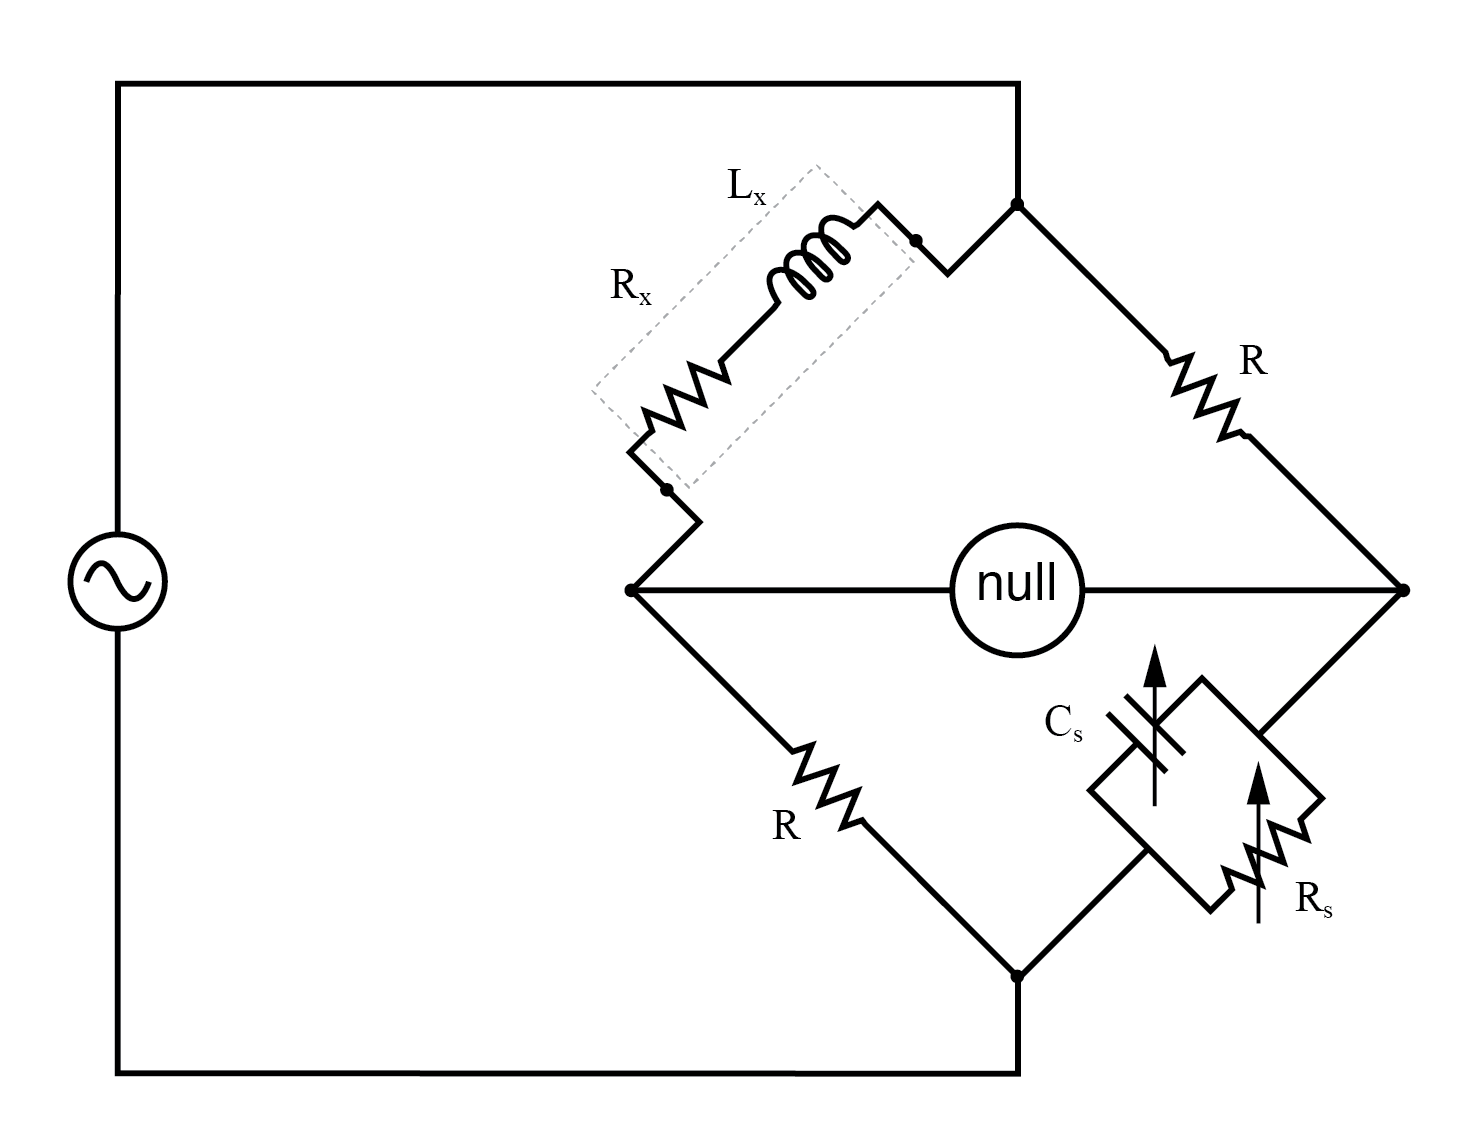 Maxwell-Wein bridge measures an inductor in terms of a capacitor standard.